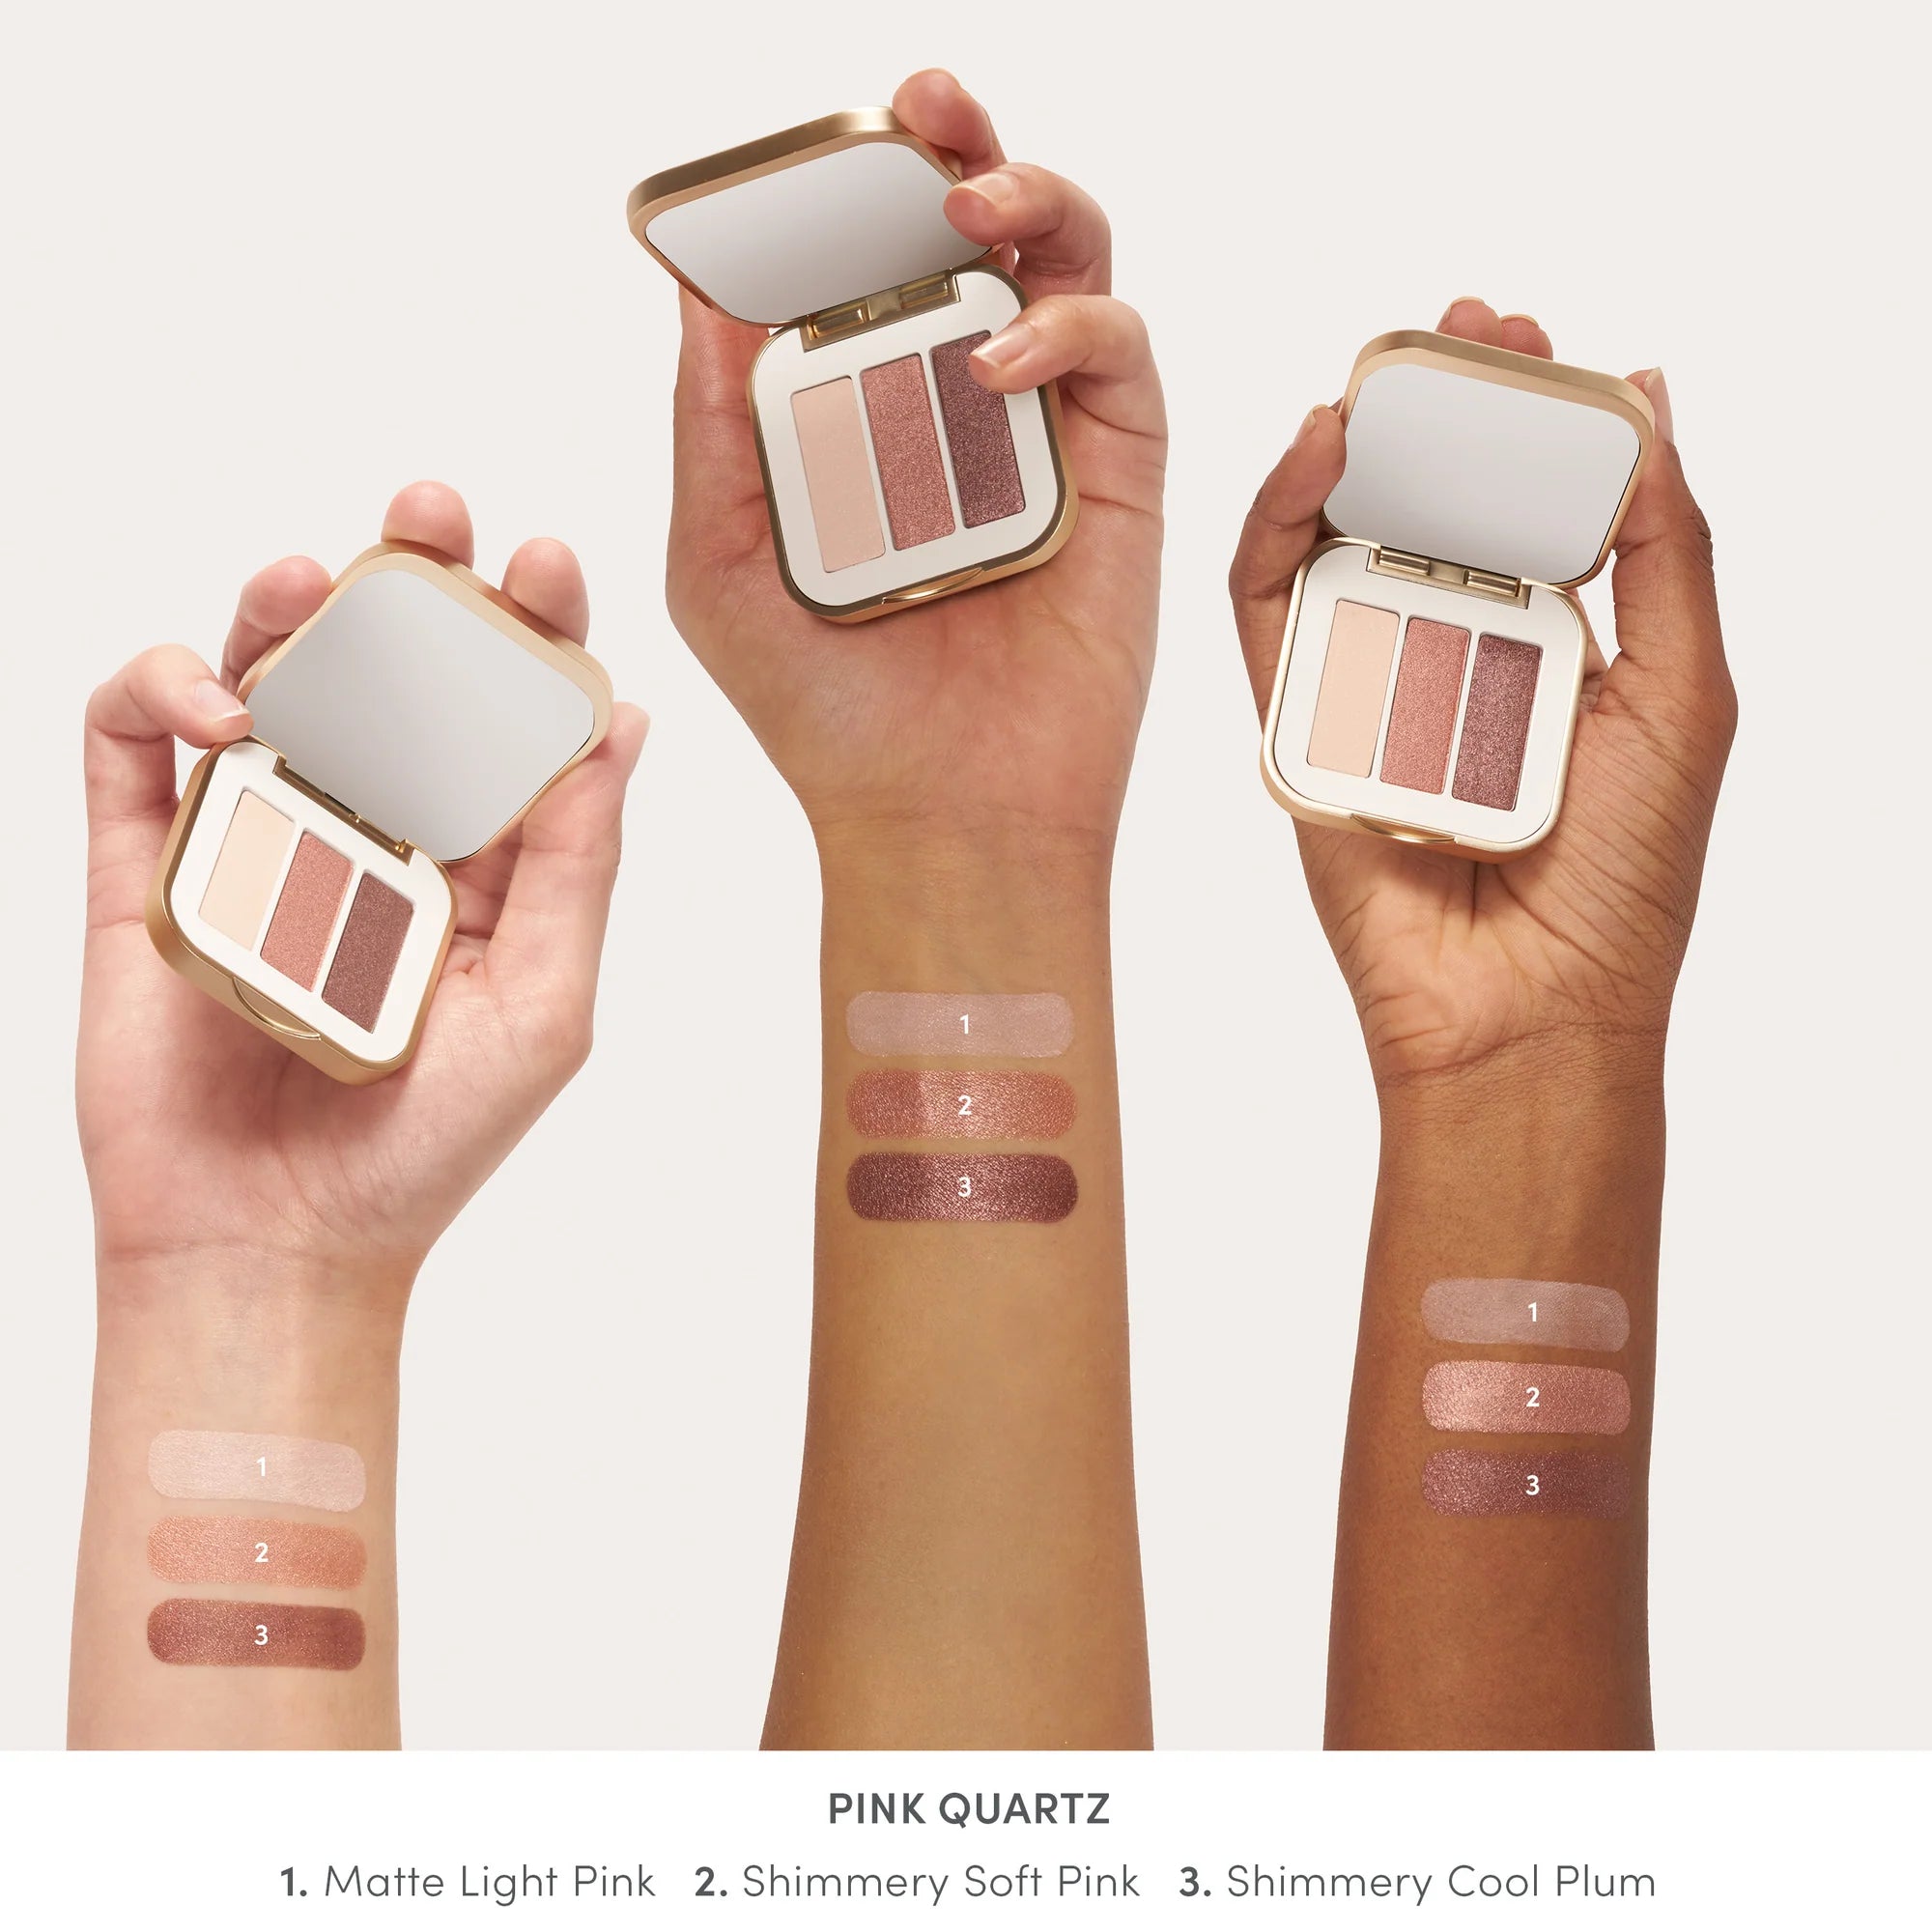 Jane Iredale's PurePressed® Eye Shadow Triple shade Pink Quartz - matte light pink, shimmery soft pink, shimmery cool plum swatch